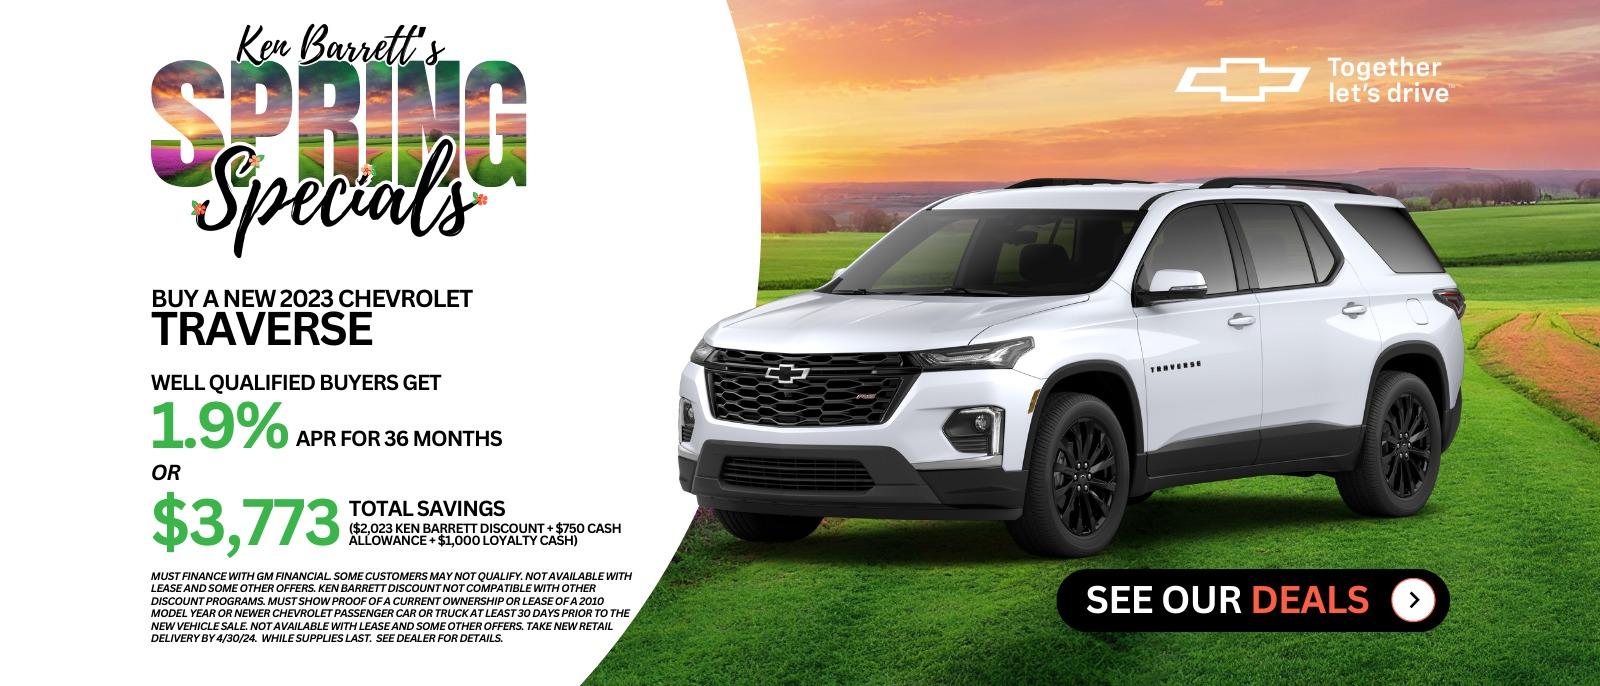 Ken Barrett's Spring Specials new deals on new Chevrolets in Batavia NY.  Find the Chevy deal for you.  Check out the new car deal on this brand new Chevrolet Traverse